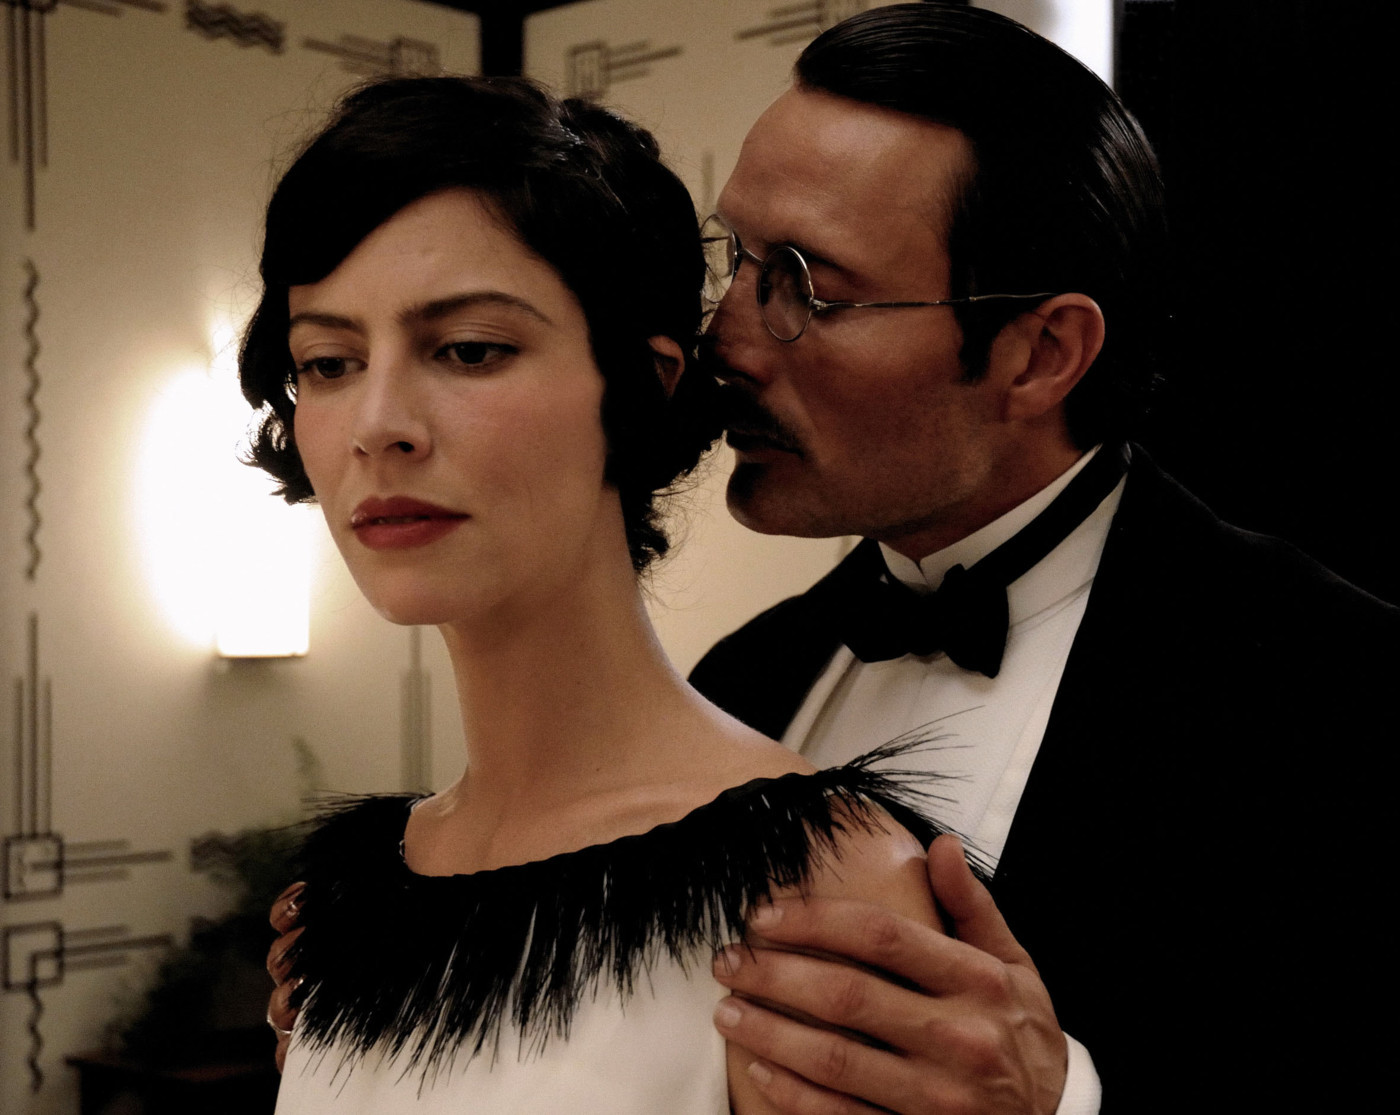 Still of Mads Mikkelsen and Anna Mouglalis in Coco Chanel & Igor Stravinsky (2009)